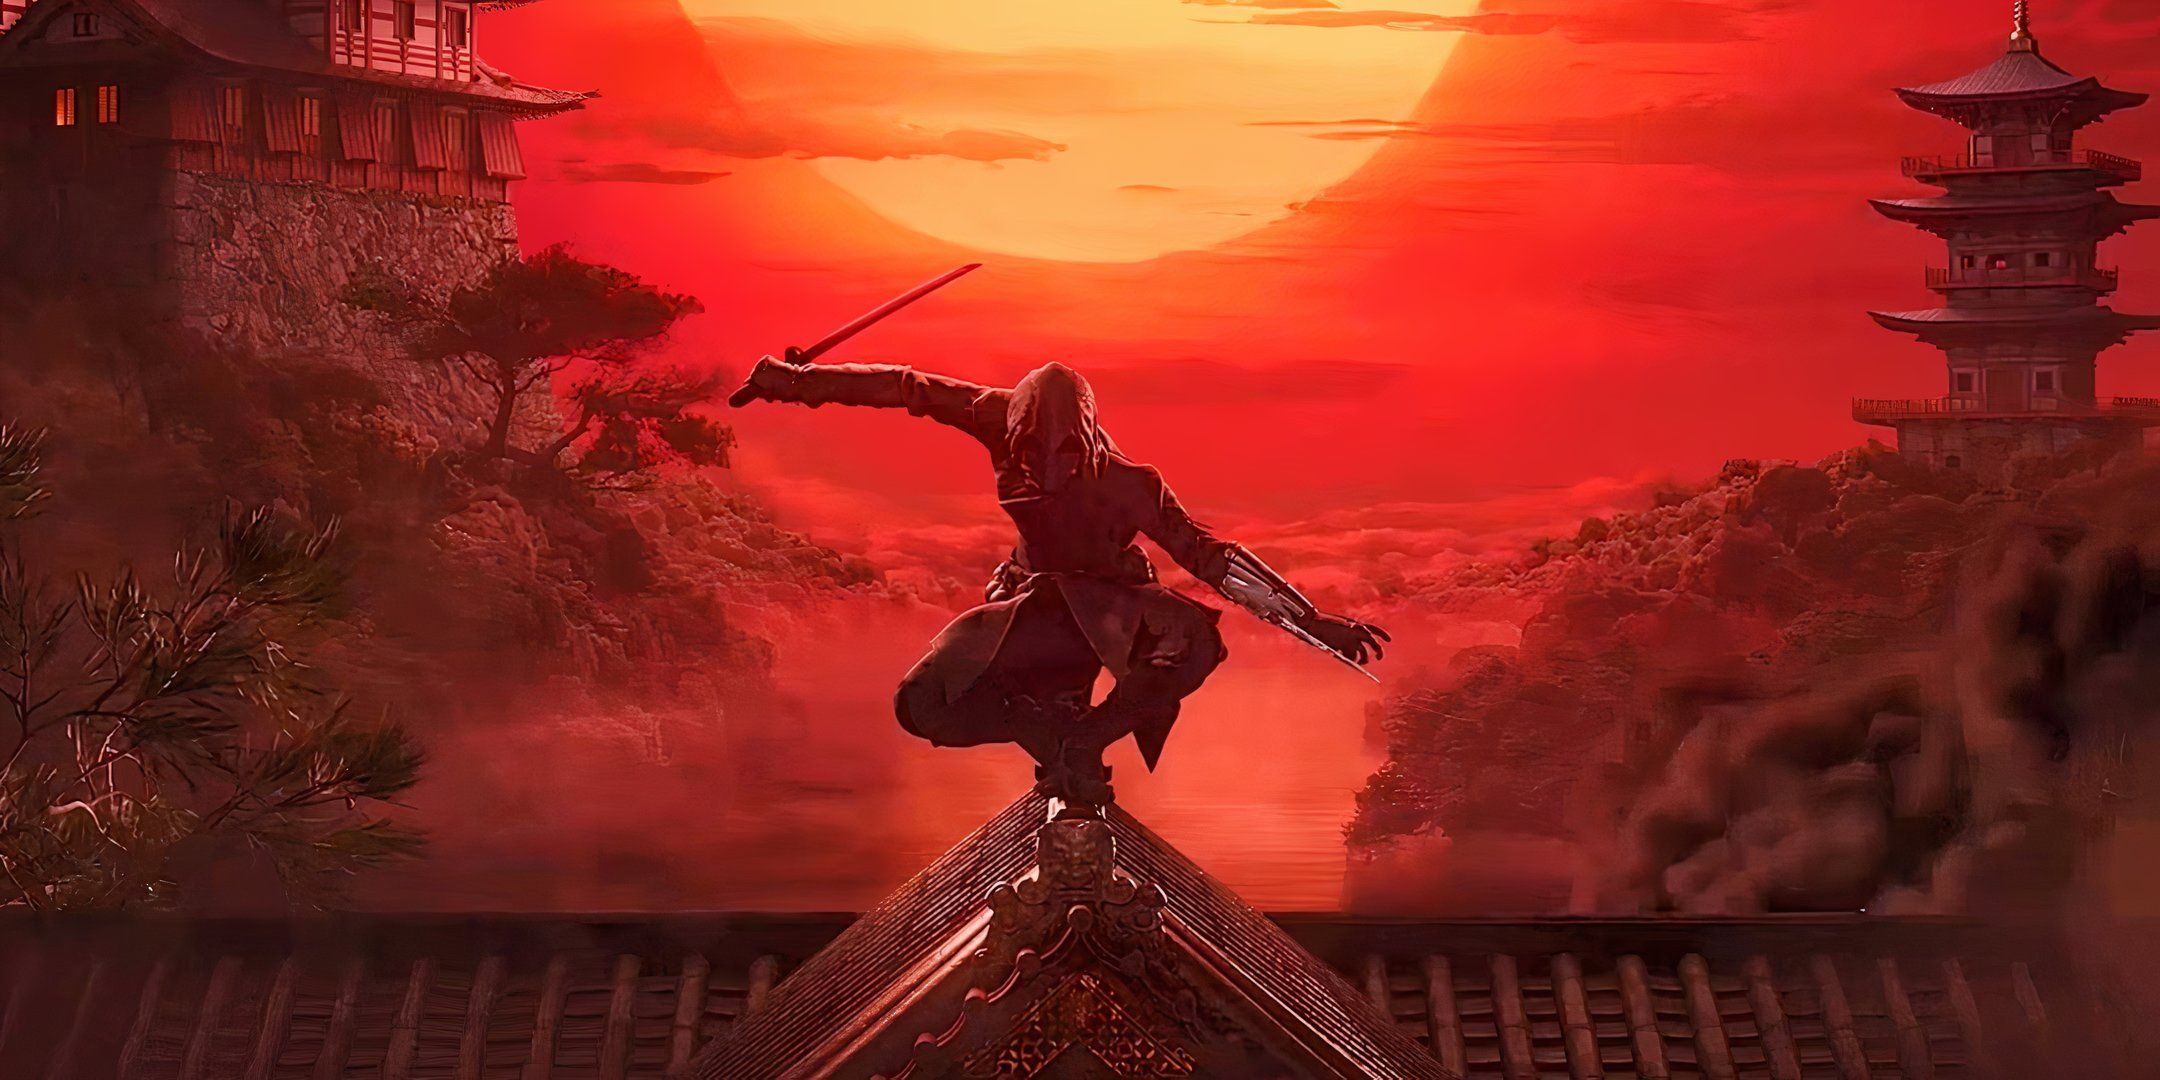 An assassin on a rooftop with a red sky in the background